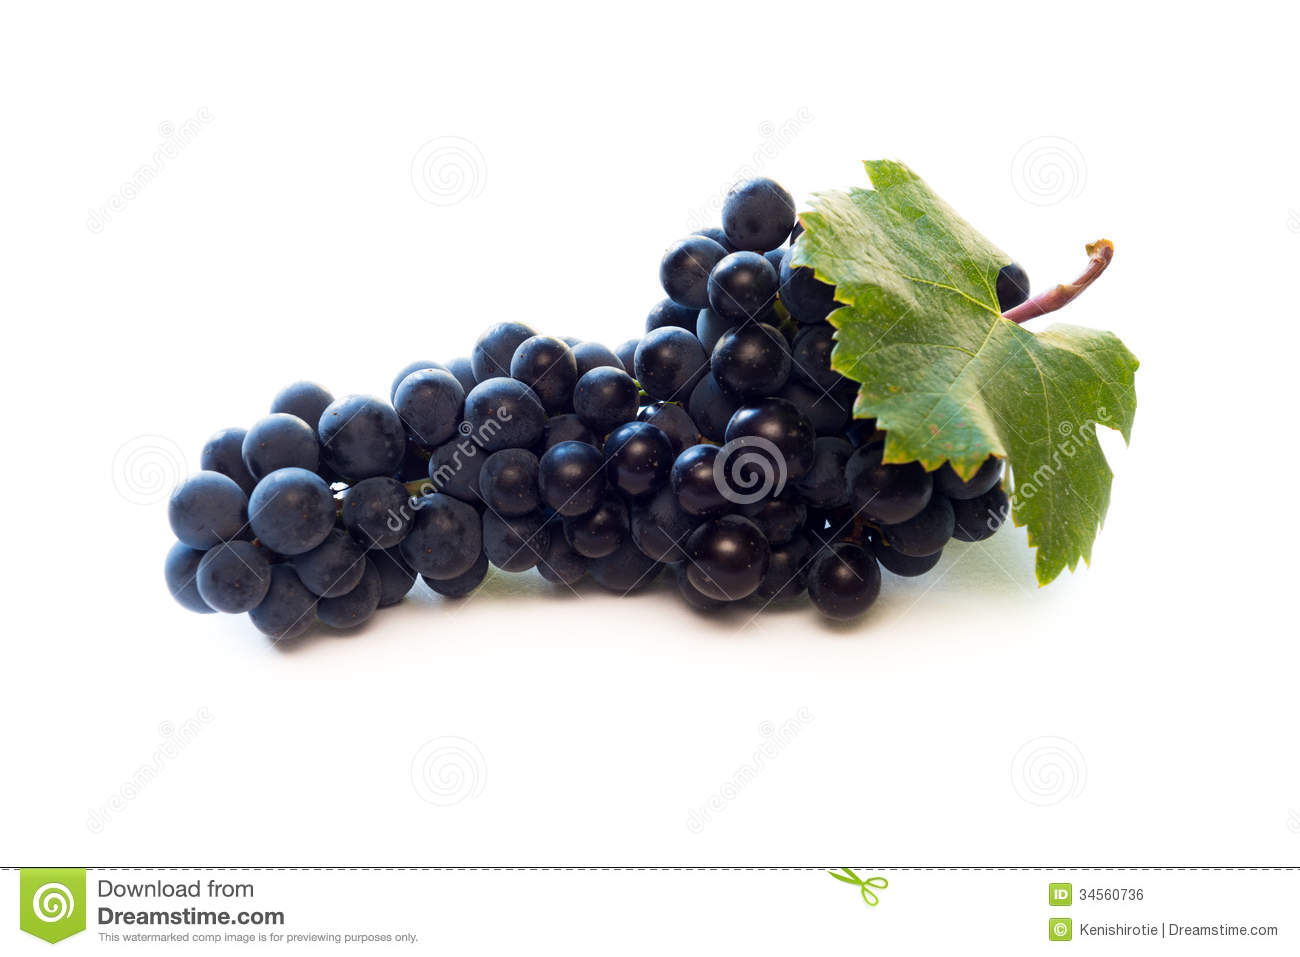 Red Wine Grapes Royalty Free Stock Image   Image  34560736